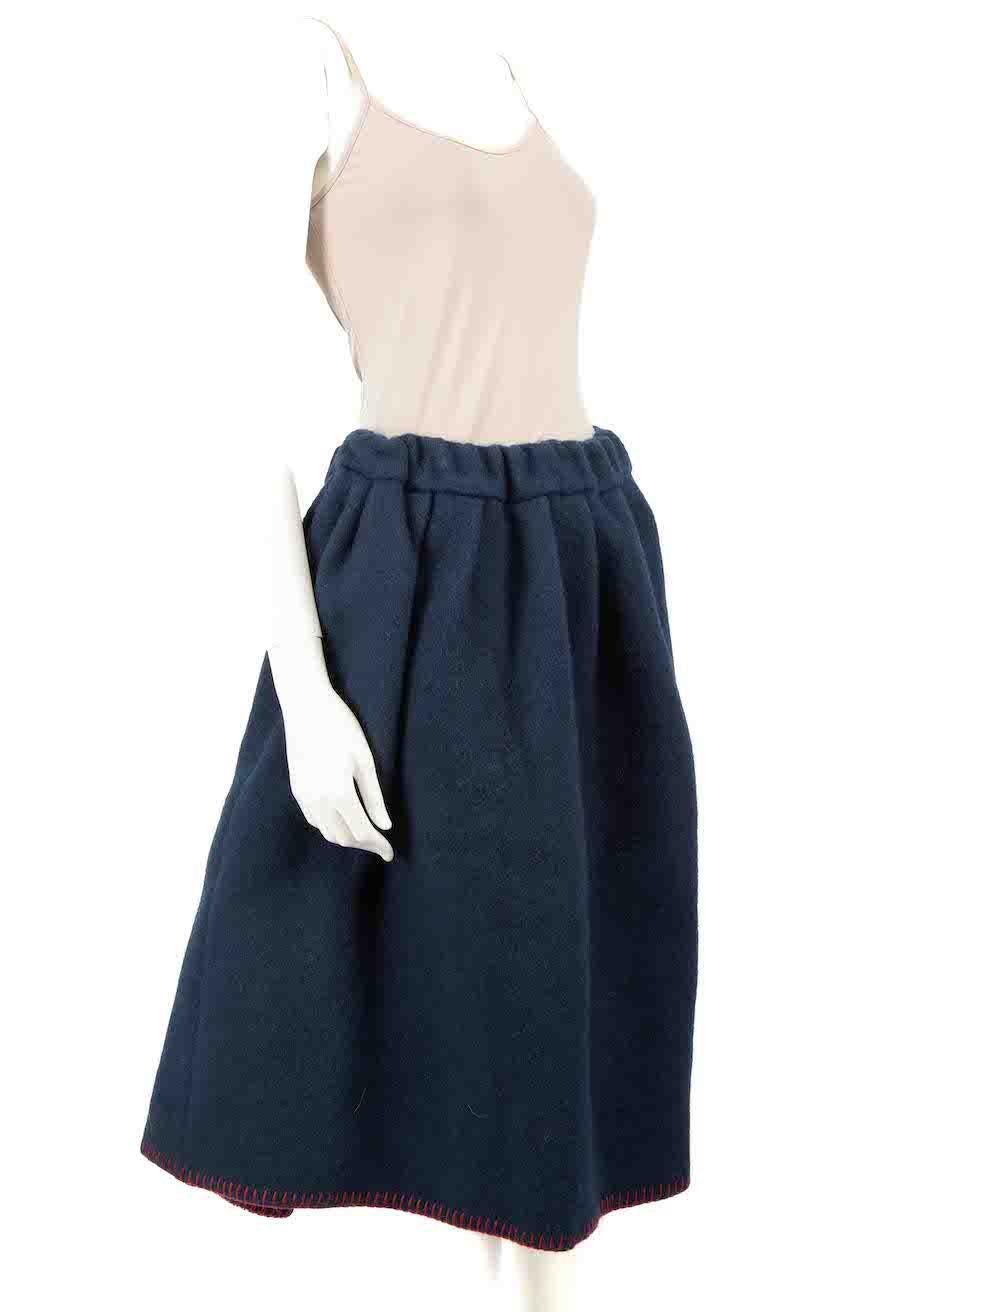 CONDITION is Never worn, with tags. No visible wear to the skirt is evident on this new Comme Des Garcons Girl designer resale item.
 
 
 
 Details
 
 
 Navy
 
 Wool
 
 Full skirt
 
 Midi length
 
 Elasticated waistband
 
 2x Front side pockets
 
